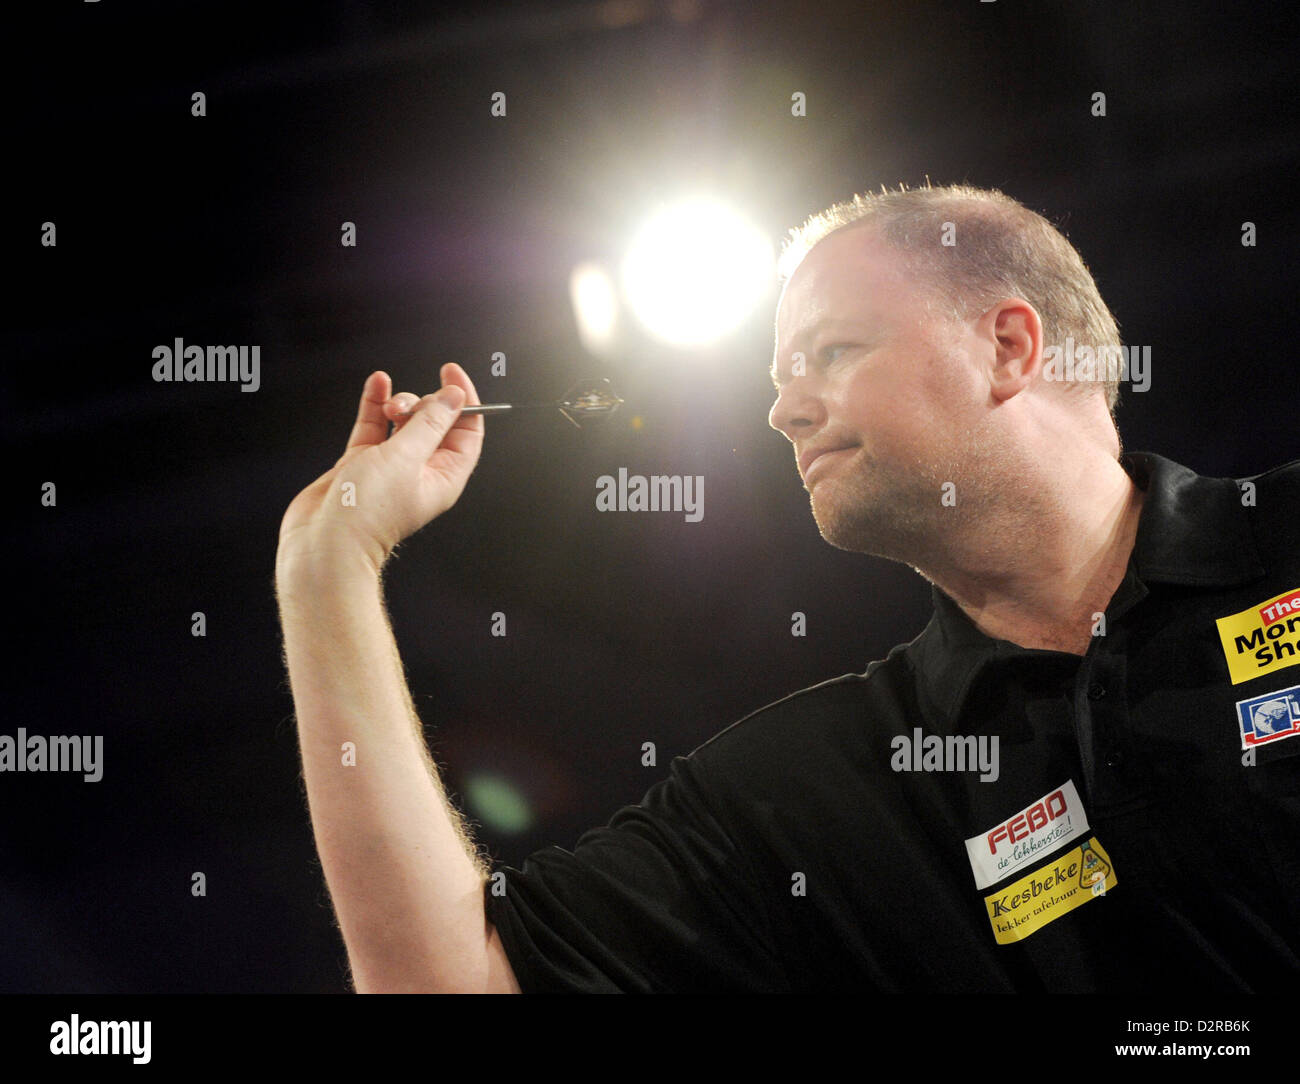 Plante træer Mikroprocessor Kritisere Hamburg, Germany. 31st January 2013. Dutch dart player Raymond van  Barneveld throws a dart during a show tournament with HSV players against  the Professional Darts Corporation (PDC) in Hamburg, Germany, 31 January